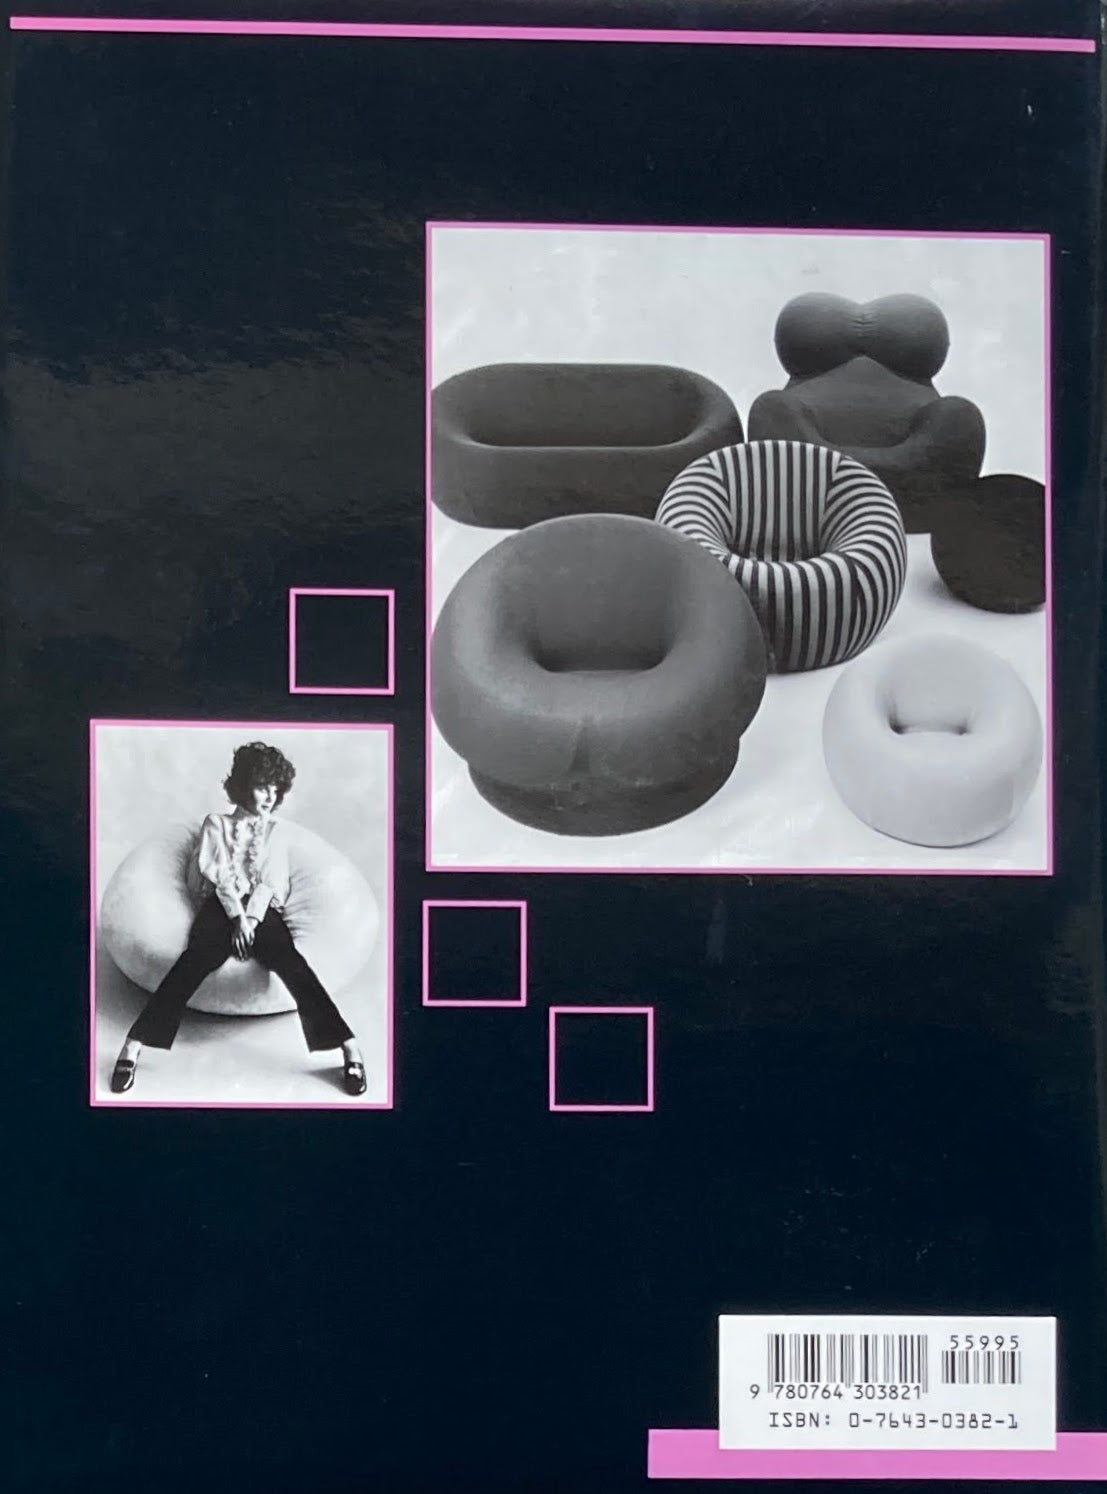 Modern Furniture Designs　1950-1980s　Schiffer Book for Collectors with Values